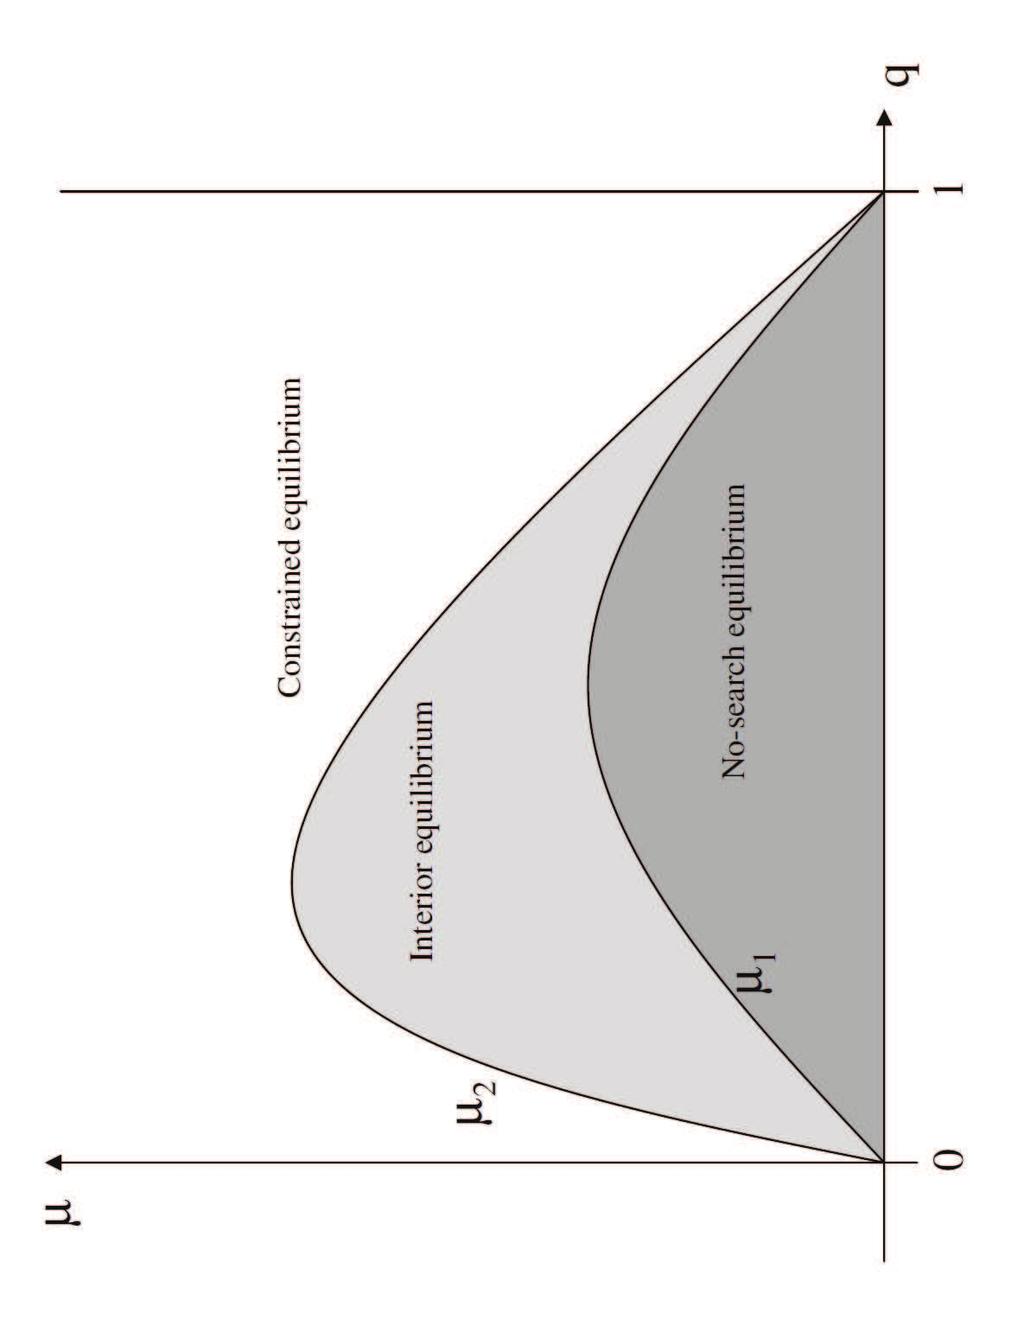 Figure 4: Equilibrium regions for q As a result, an exogenous change in ρ can change the welfare ranking between direct and representative democracy.